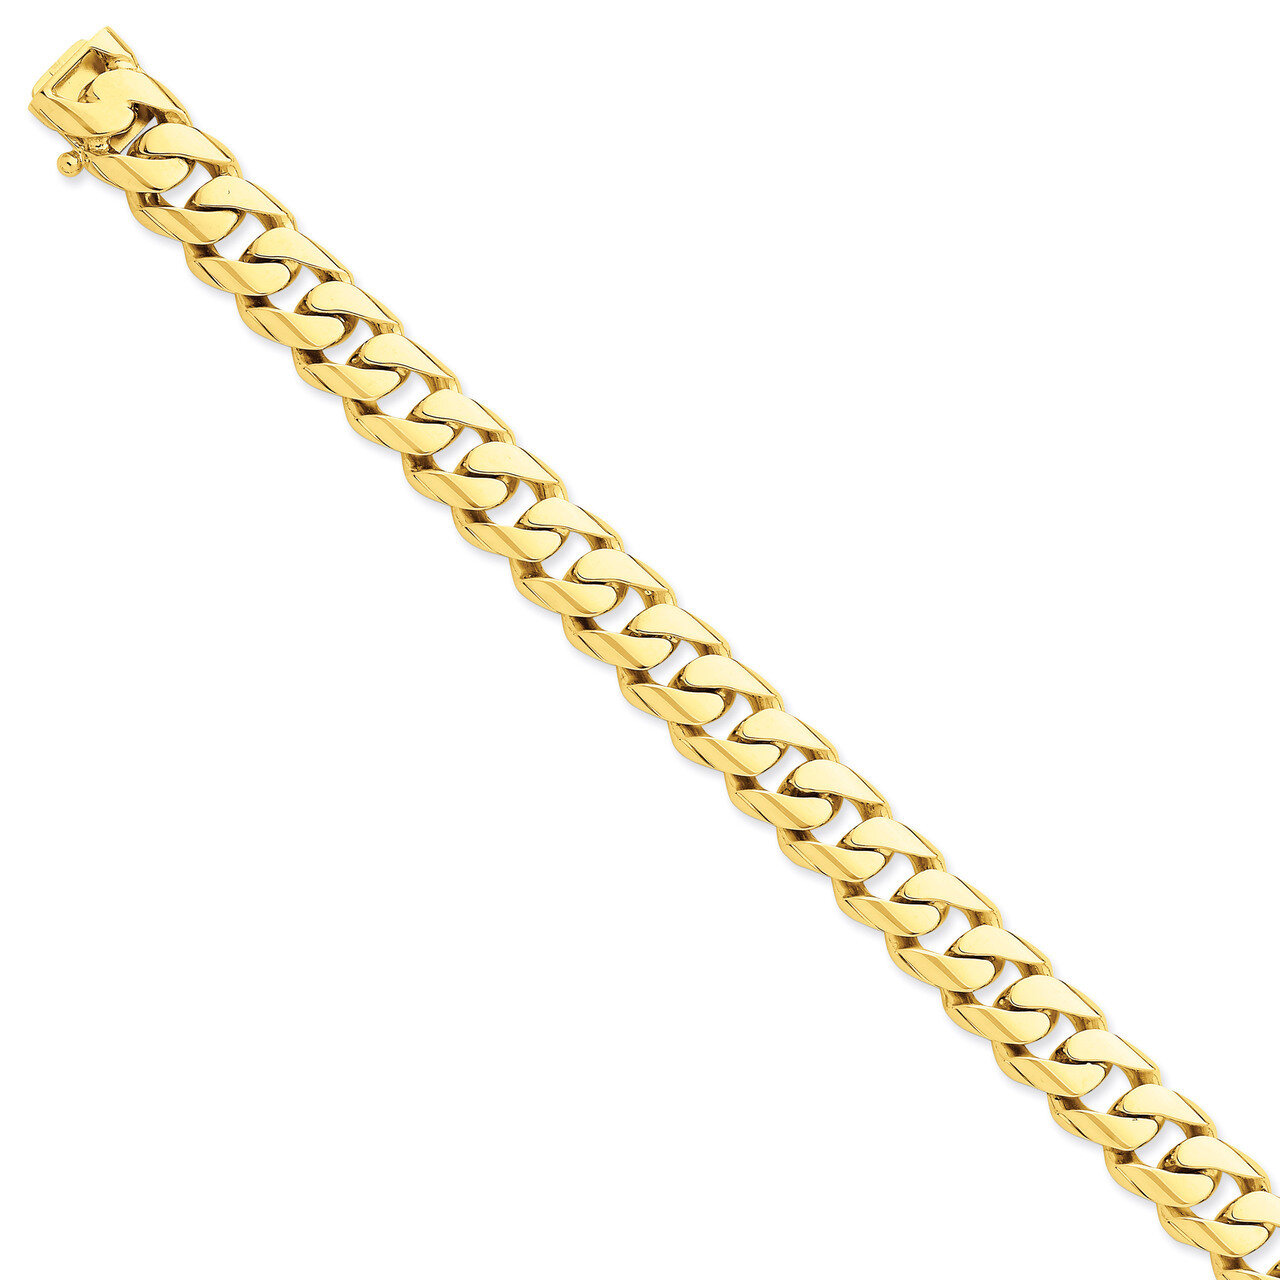 11mm Hand-polished Rounded Curb Chain 9 Inch 14k Gold LK127-9